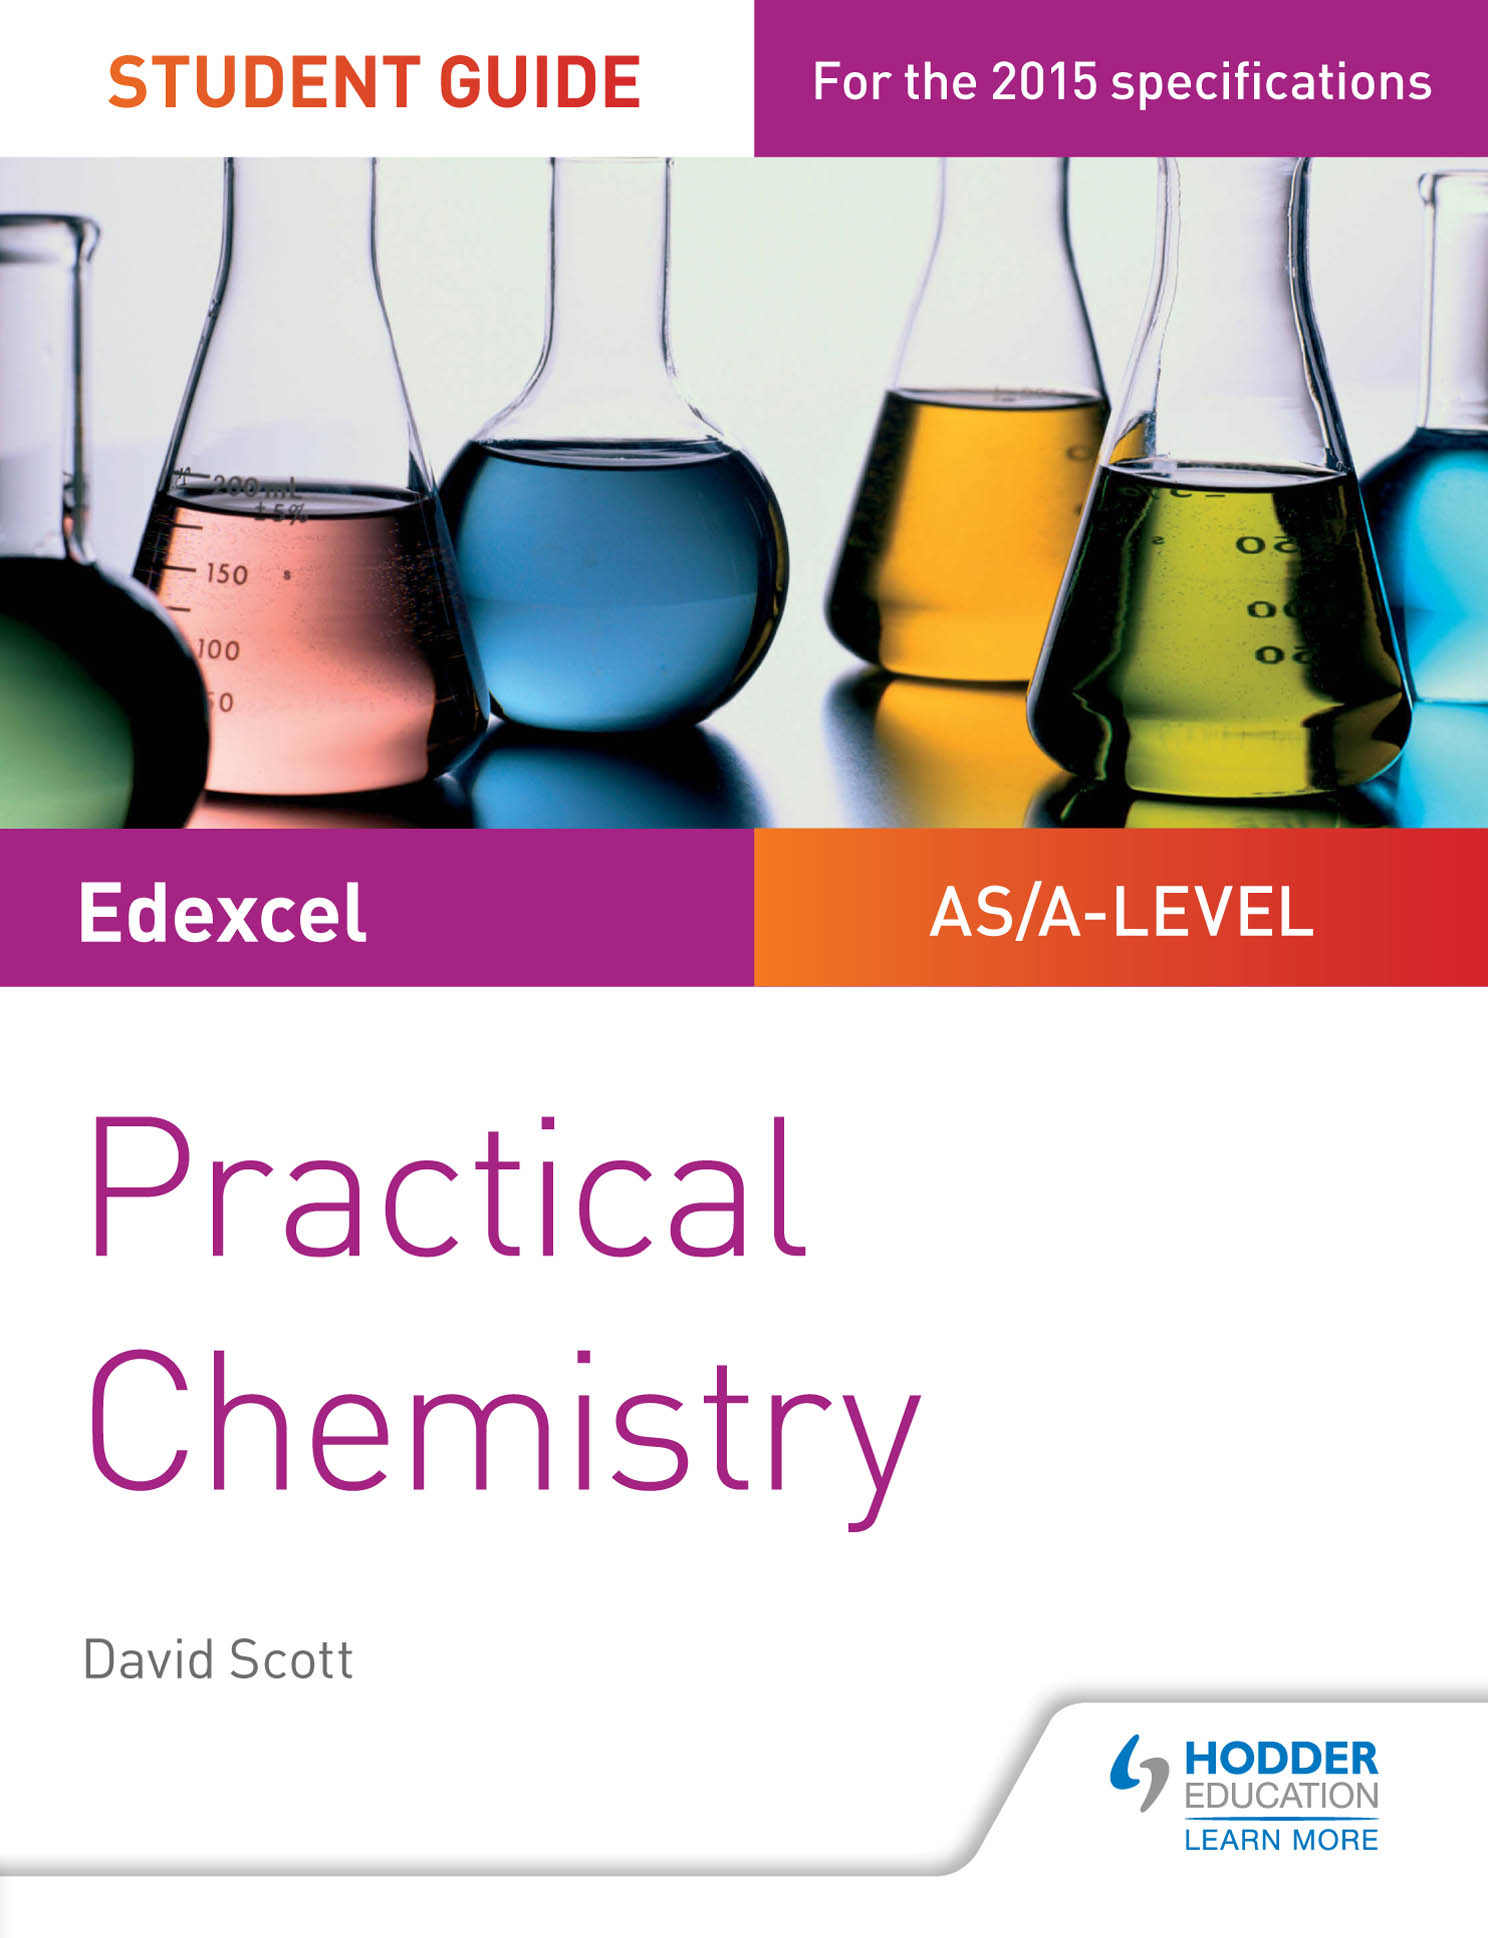 Edexcel A-level Chemistry Student Guide: Practical Chemistry